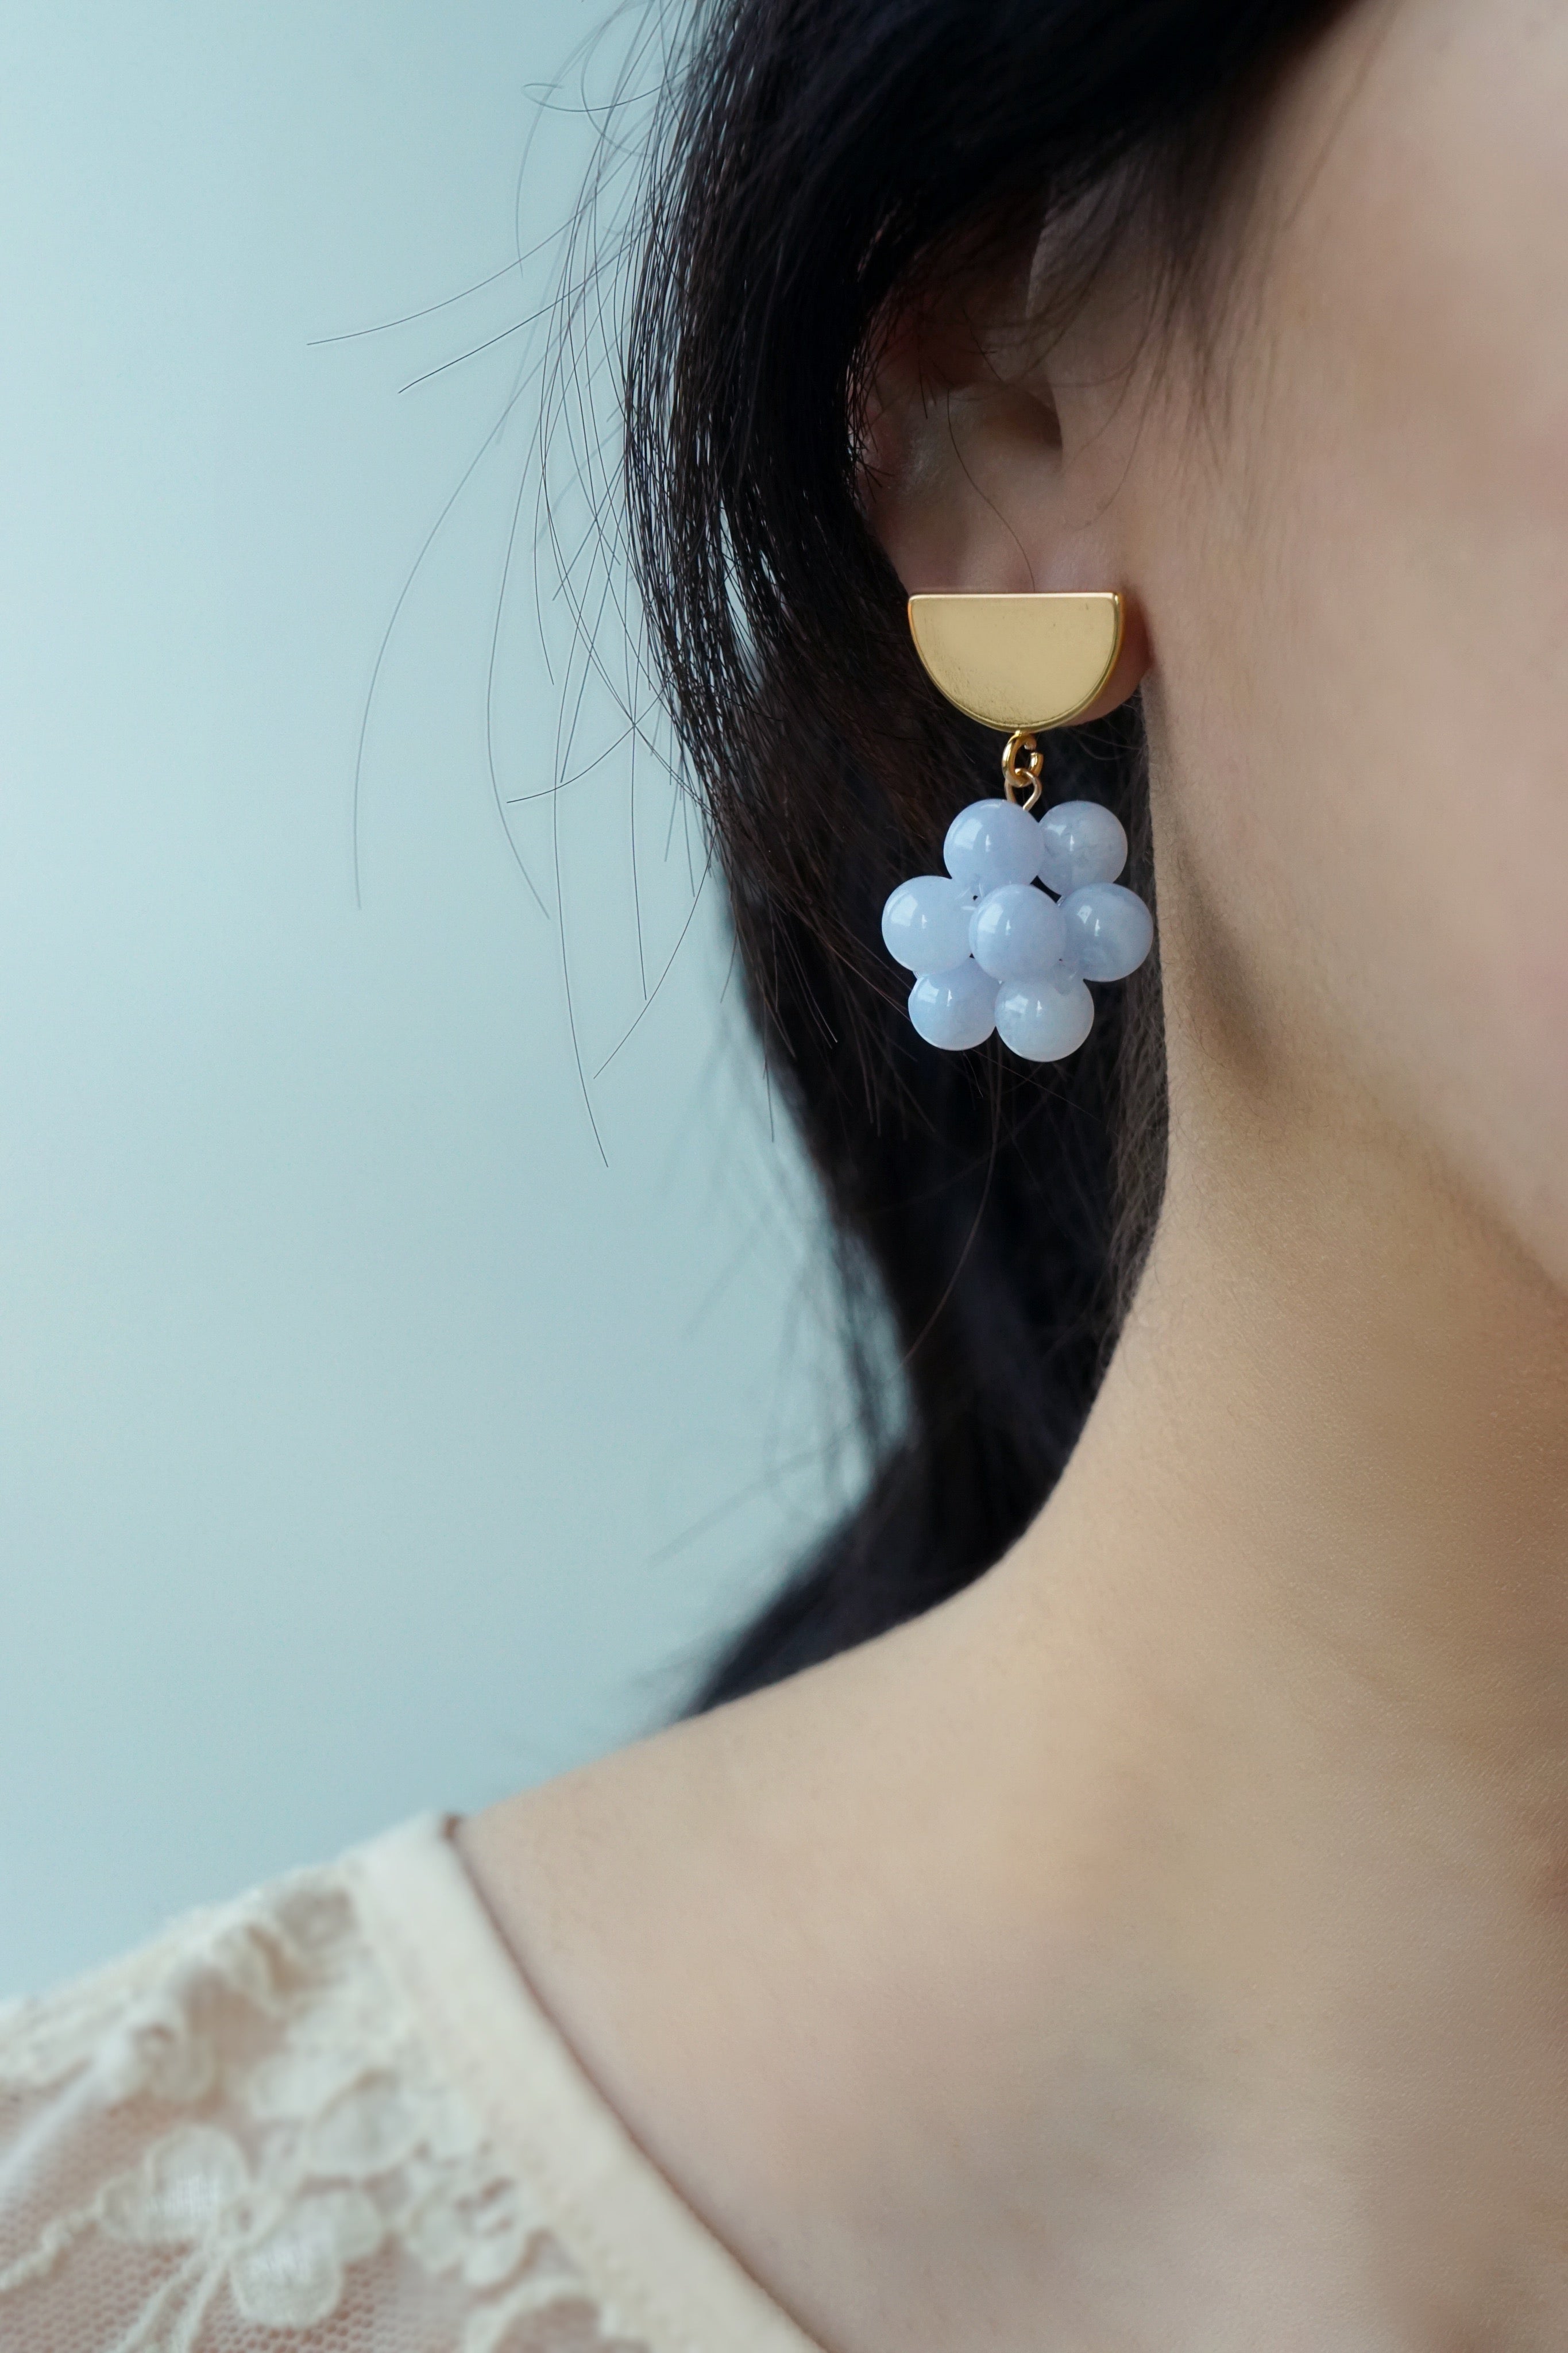 Berries Earrings - Blue Lace Agate (Mix & Match)